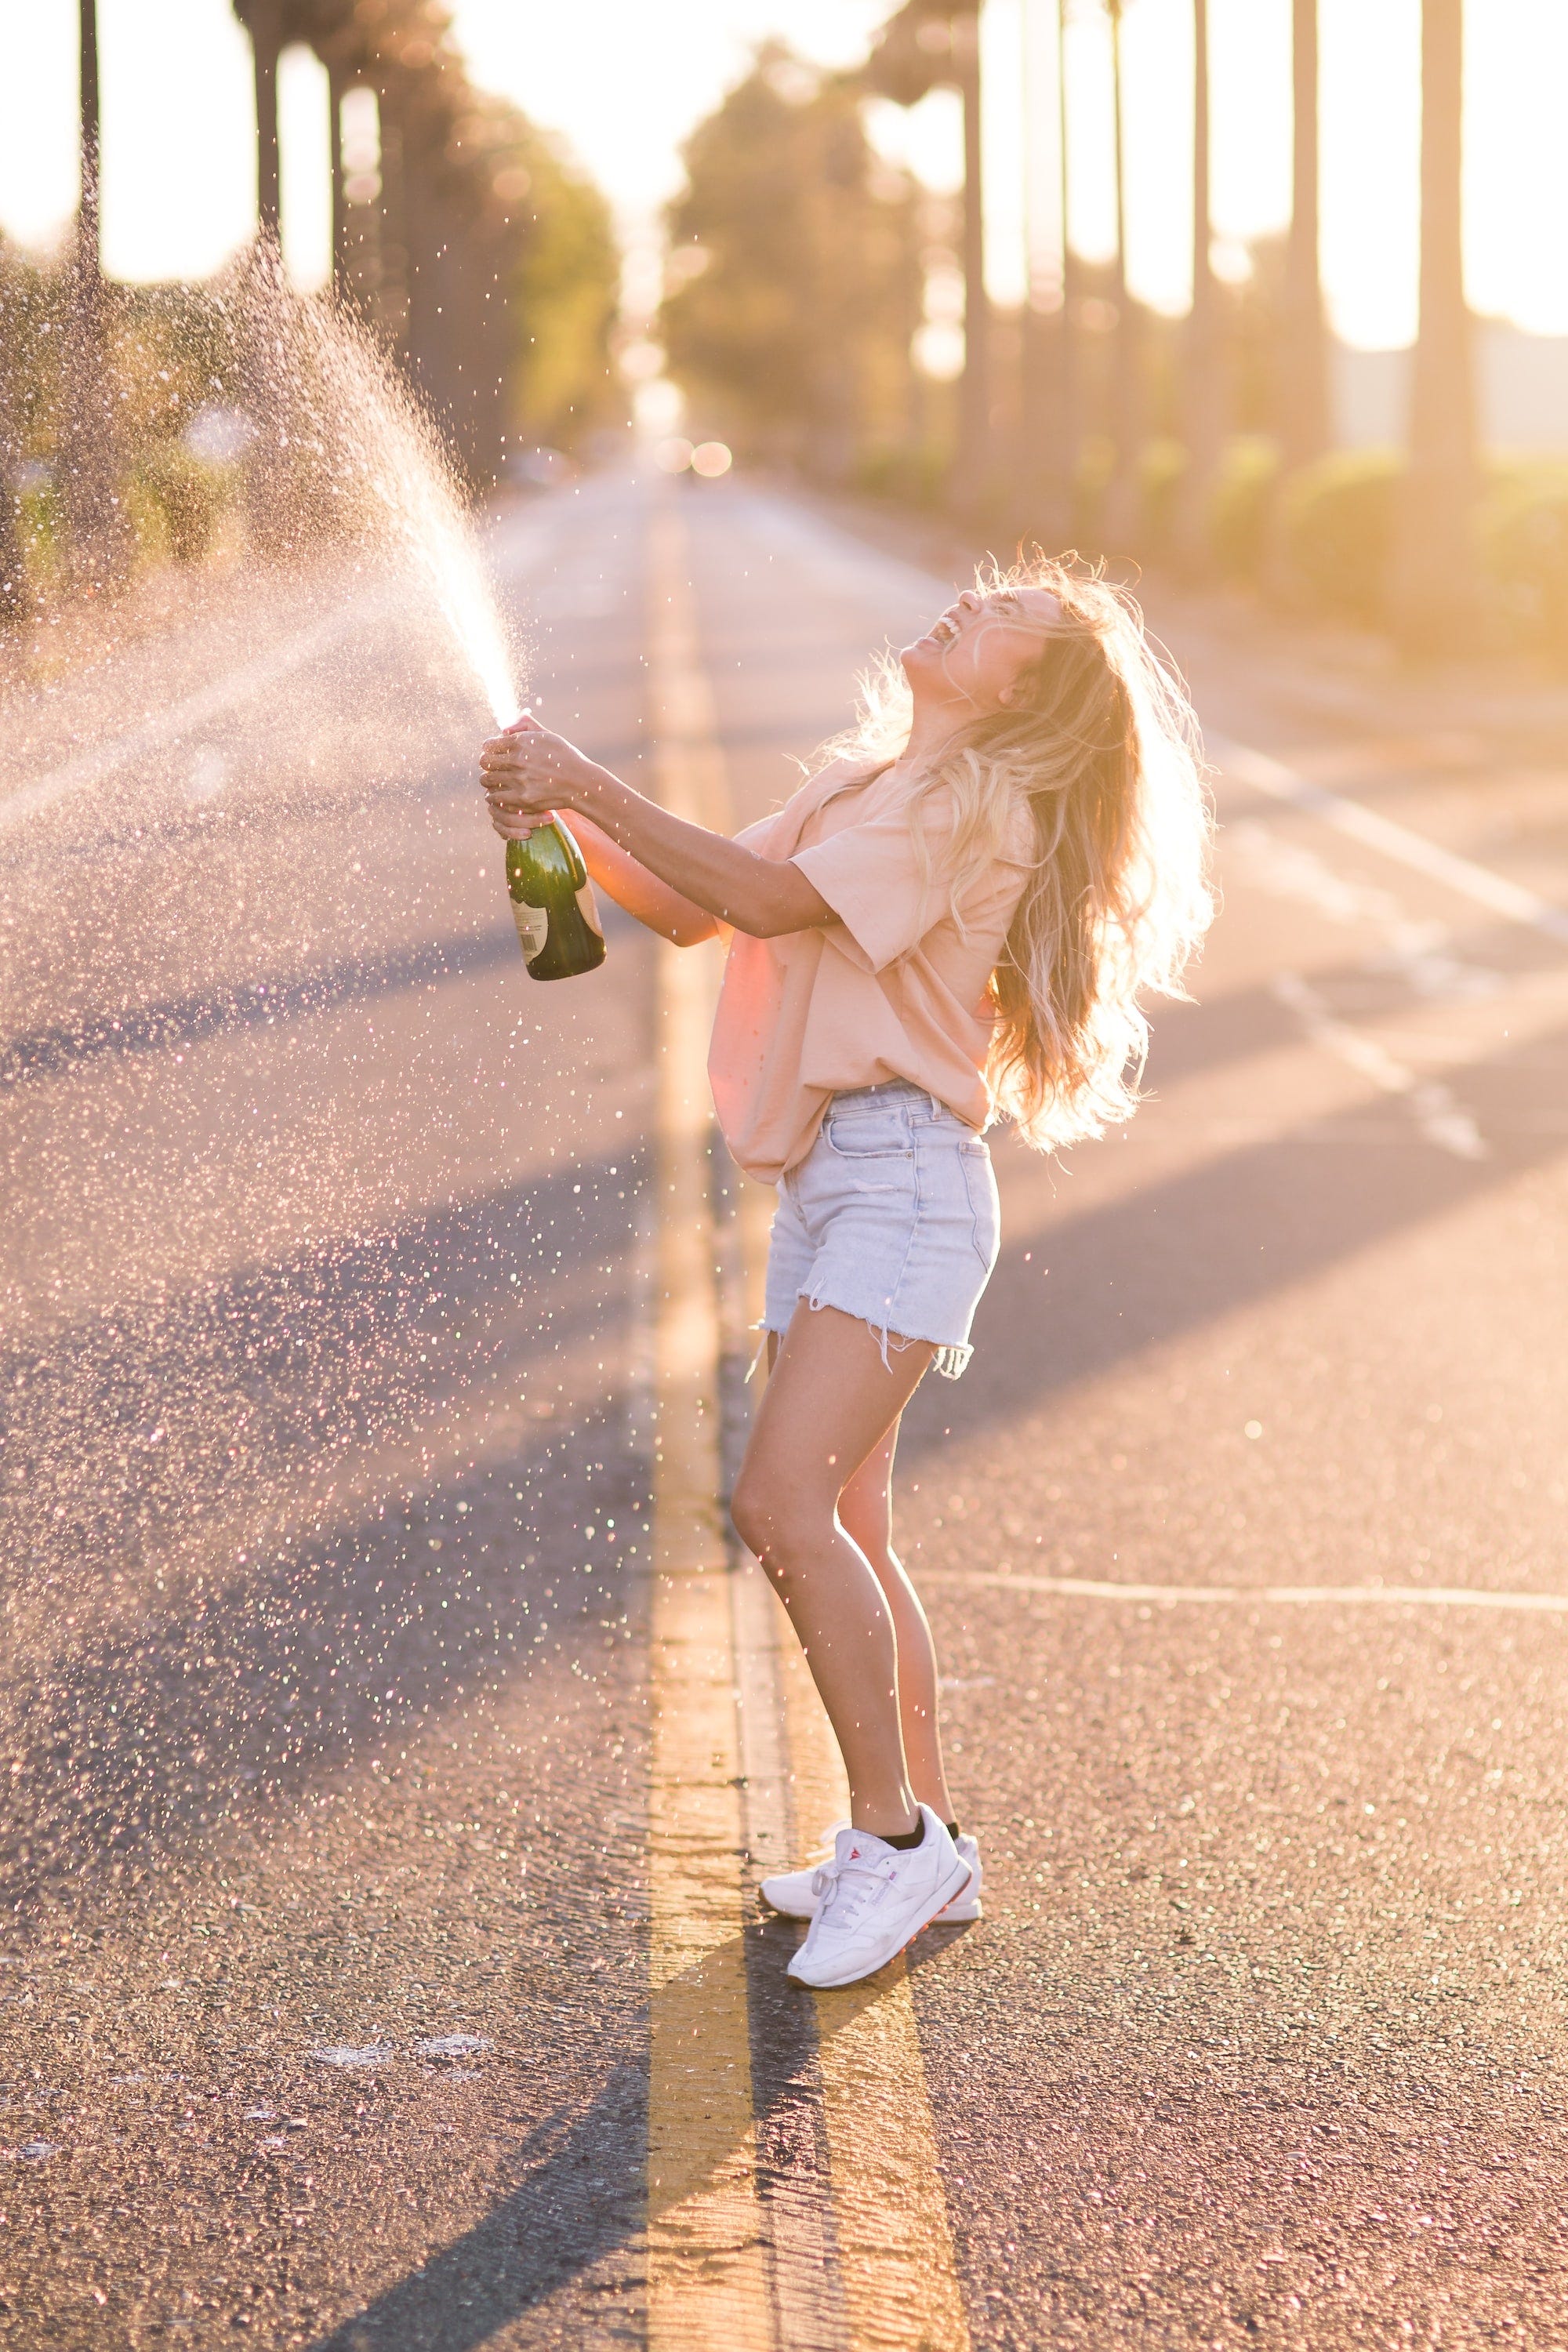 A woman popping a bottle of champagne on the road while happily shouting out